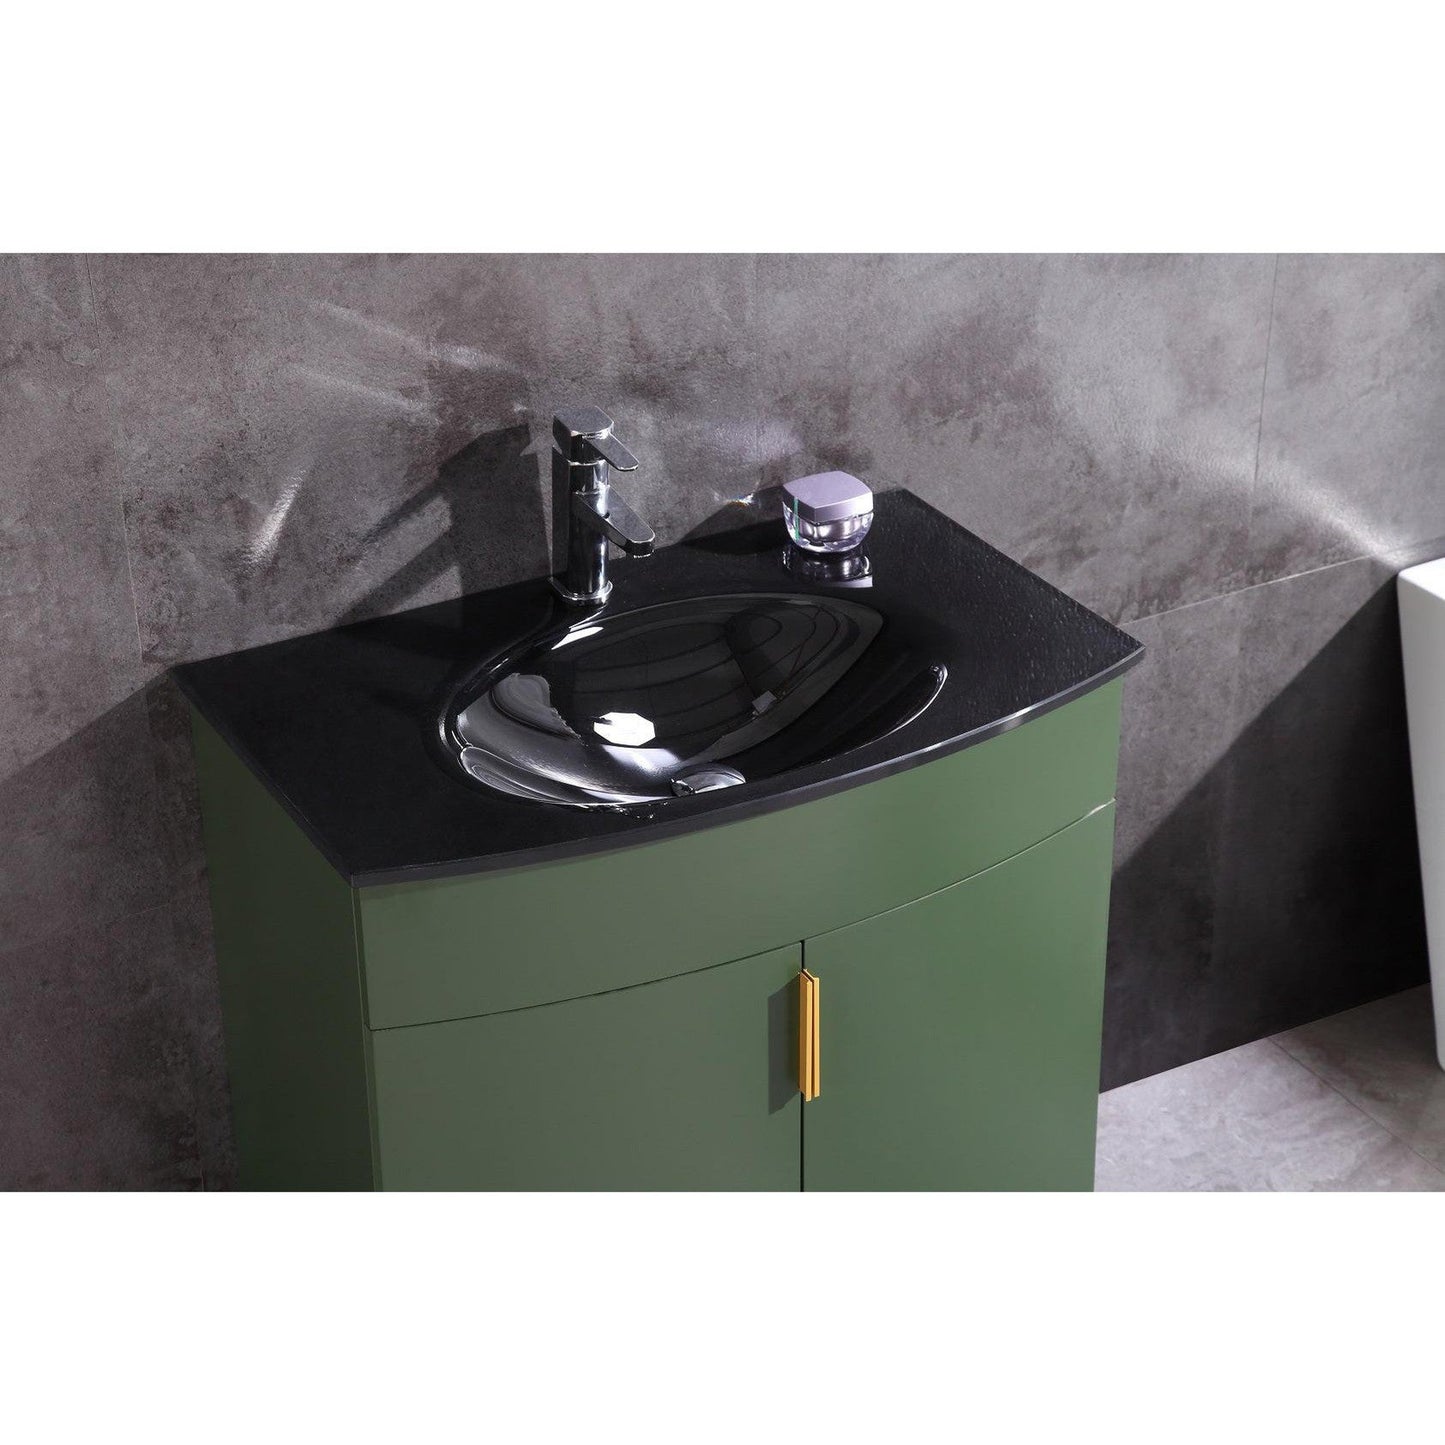 Legion Furniture WTM8130 30" Vogue Green Freestanding PVC Vanity Cabinet With Tempered Glass Top and Sink